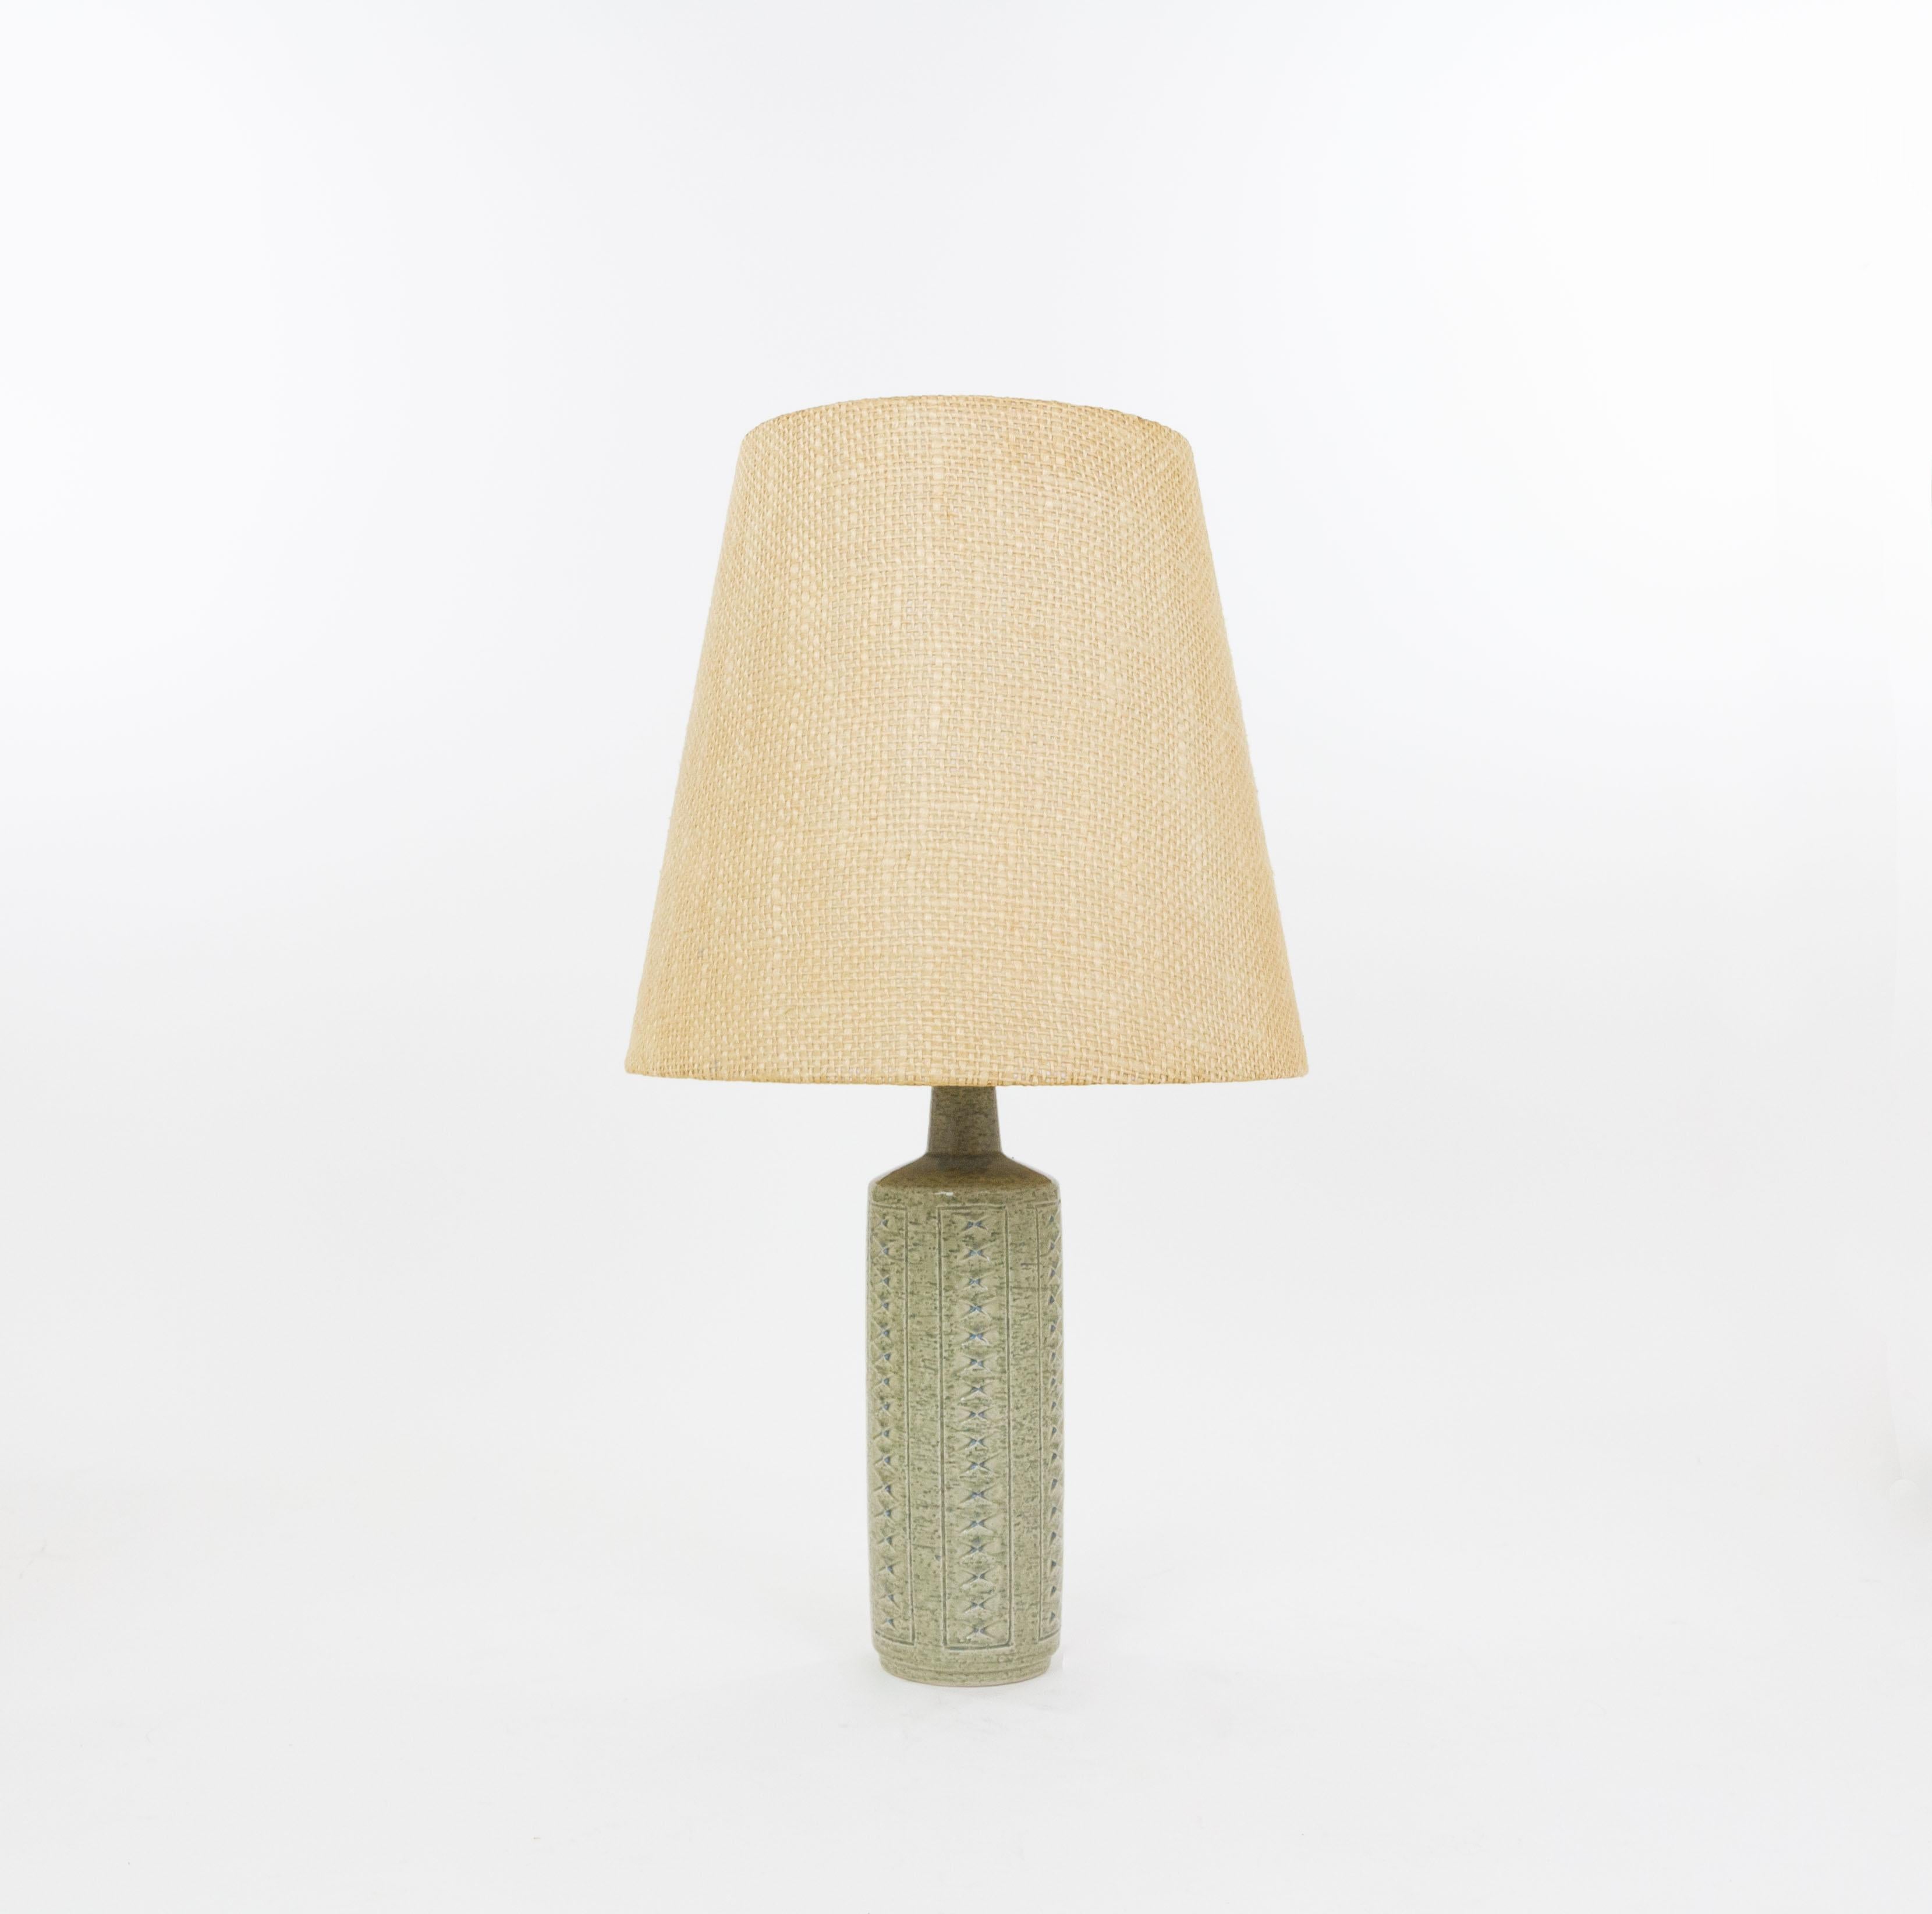 Model DL/27 table lamp made by Annelise and Per Linnemann-Schmidt for Palshus in the 1960s. The colour of the handmade decorated base is Sea Green. It has impressed patterns.

The lamp comes with its original lampshade holder. The lampshade and the